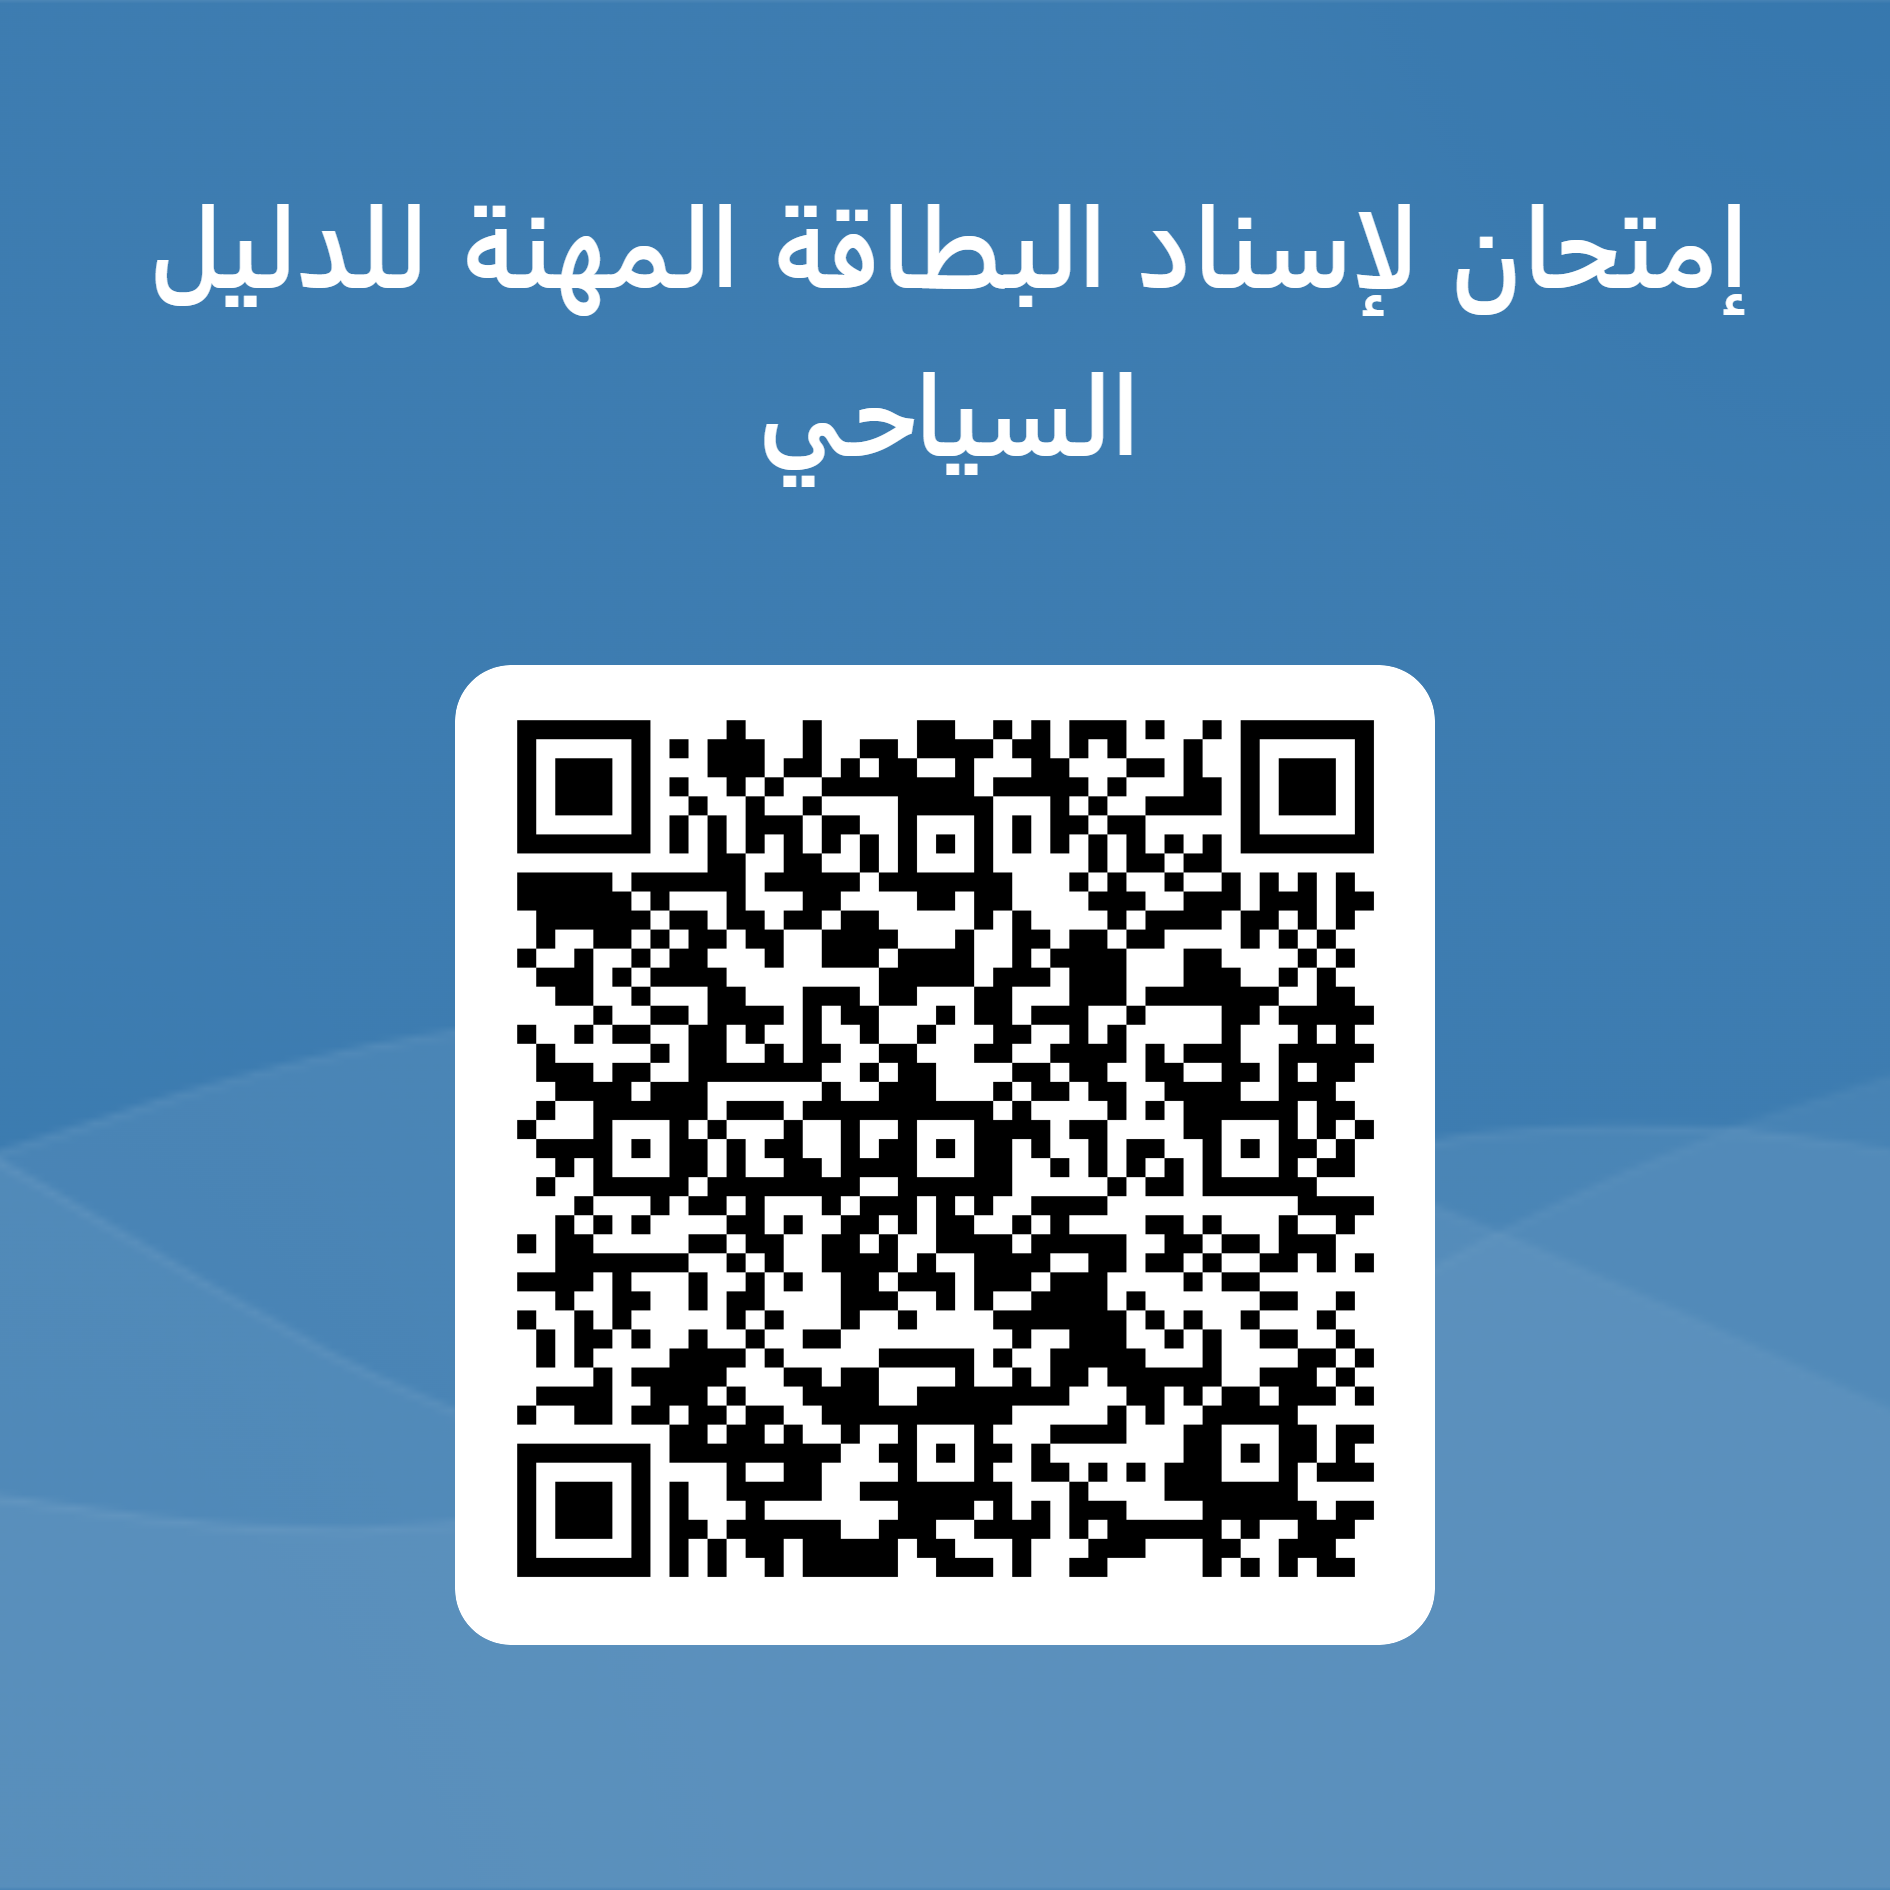 Qrcode_formulaire_guide